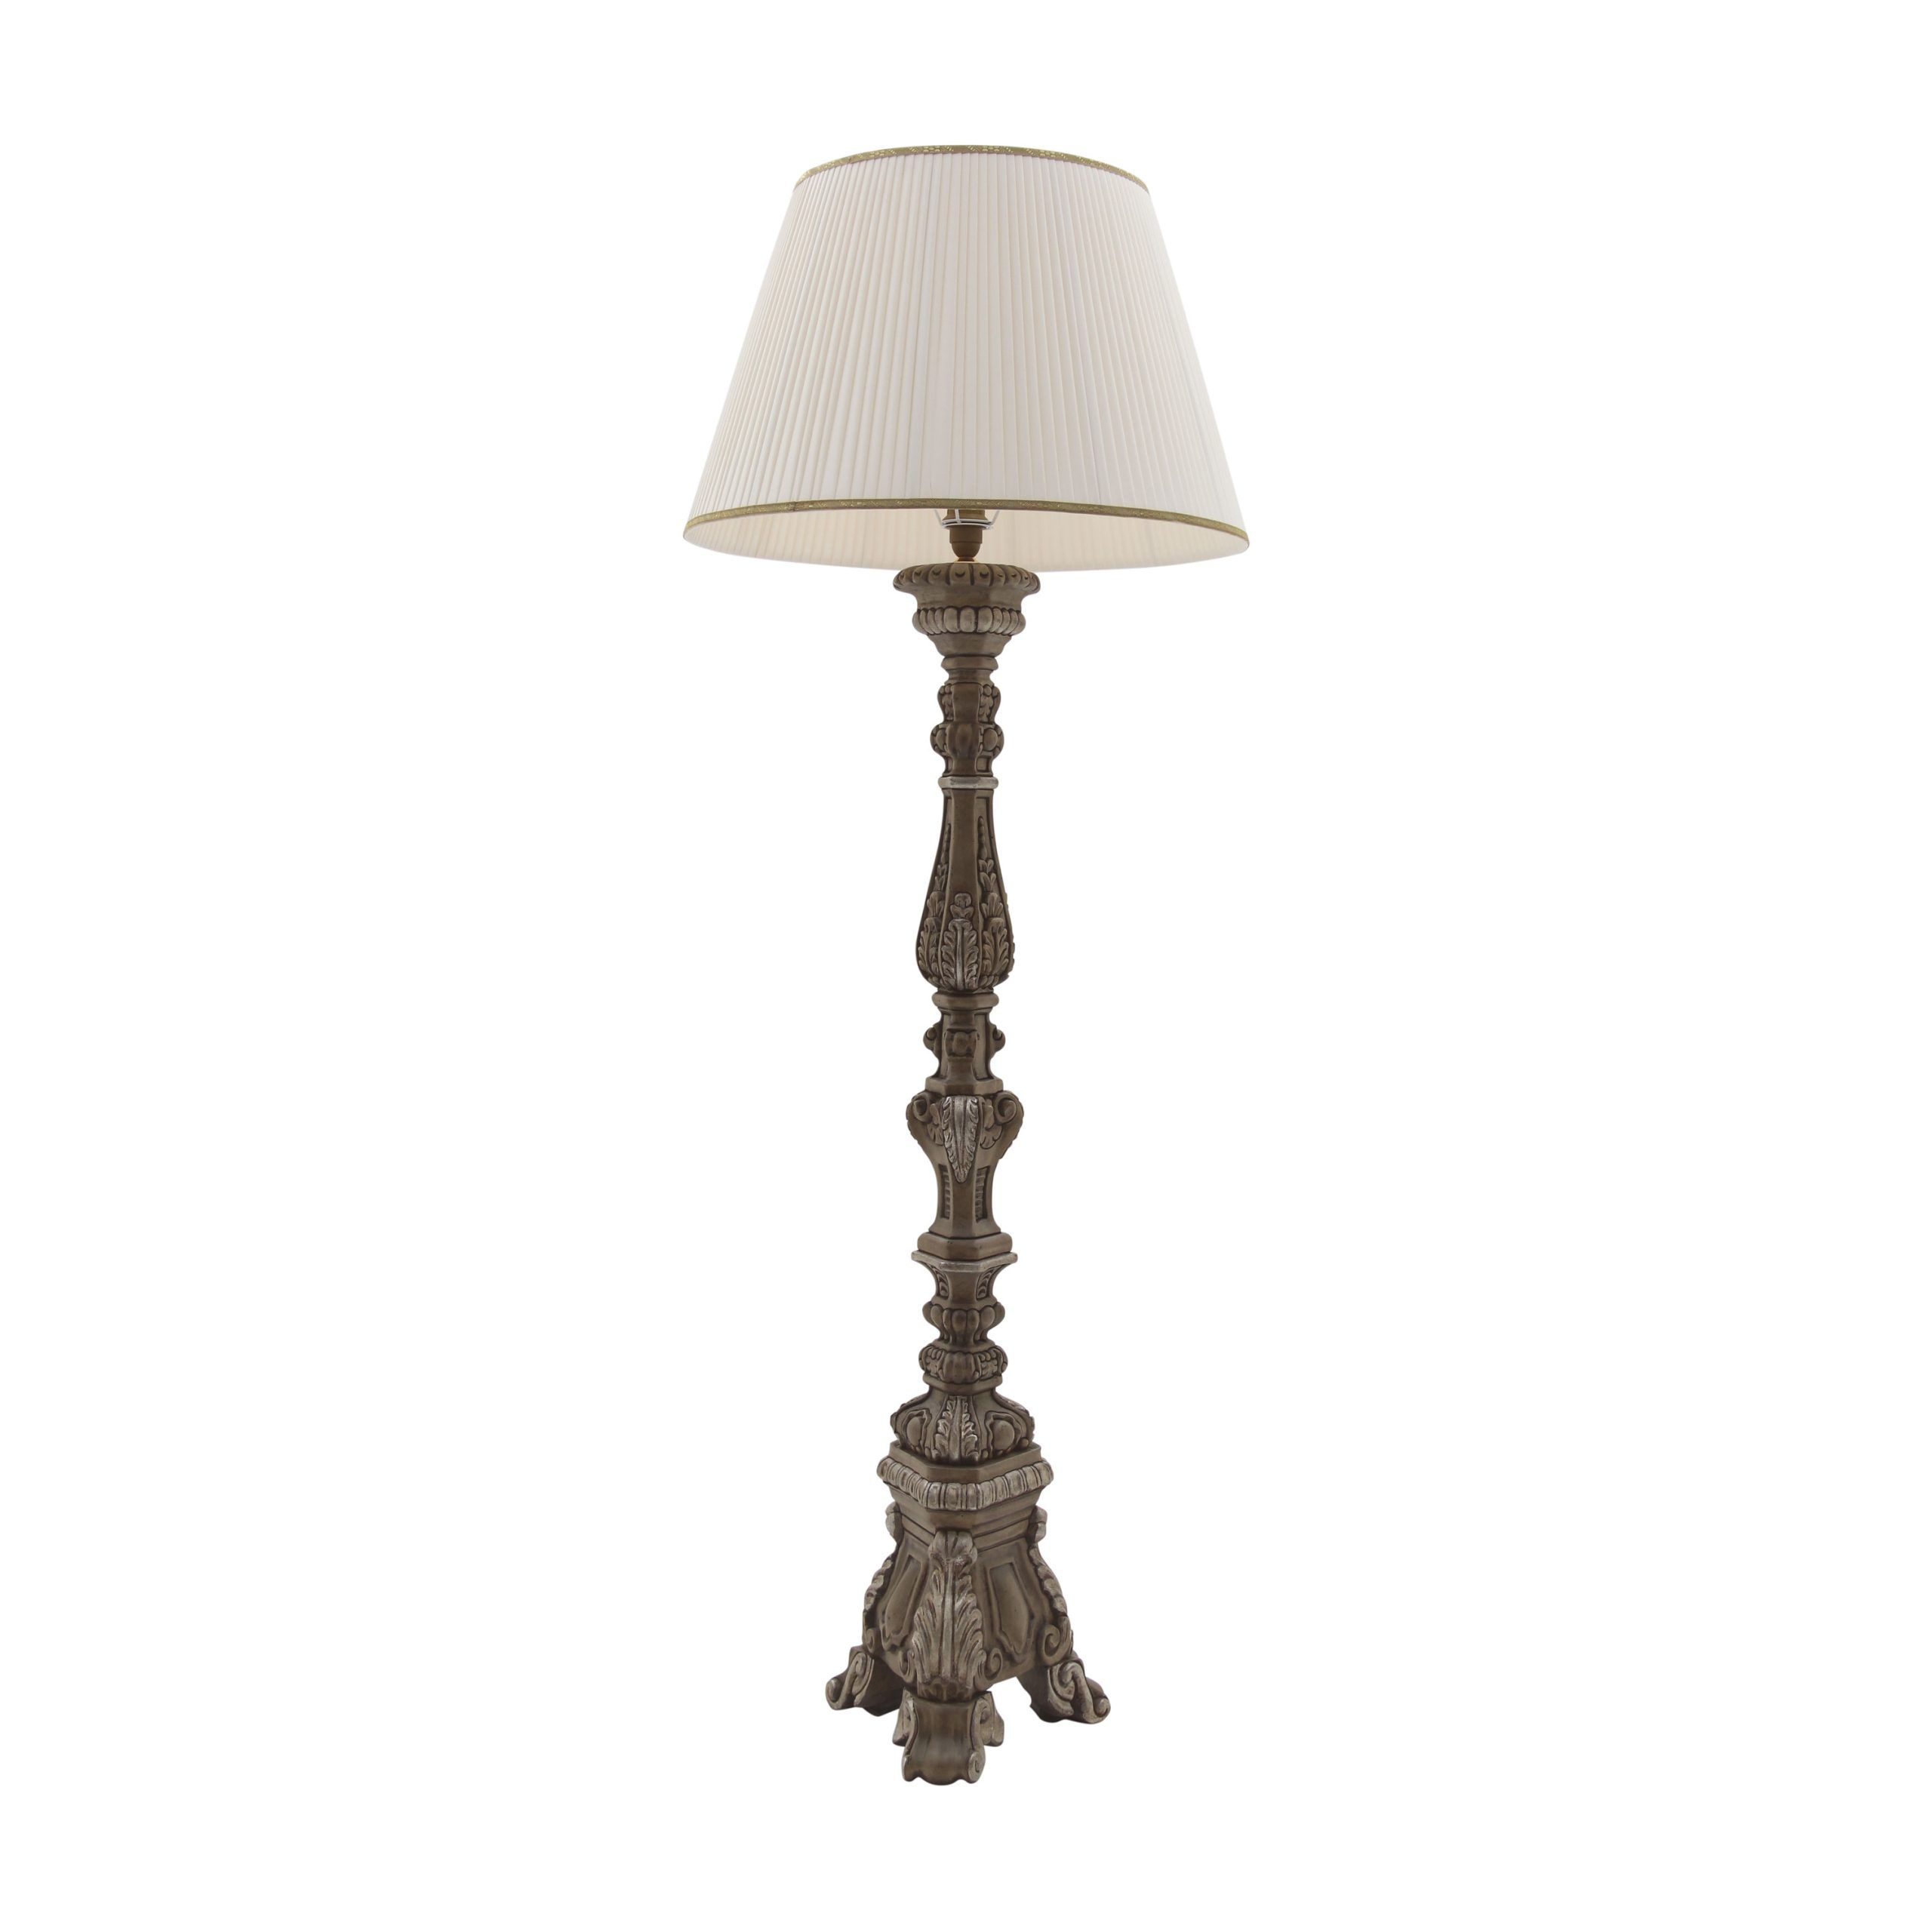 2020 Italian Floor Lamp Salina In Baroque Style With Regard To Carved Pattern Floor Lamps (View 4 of 15)